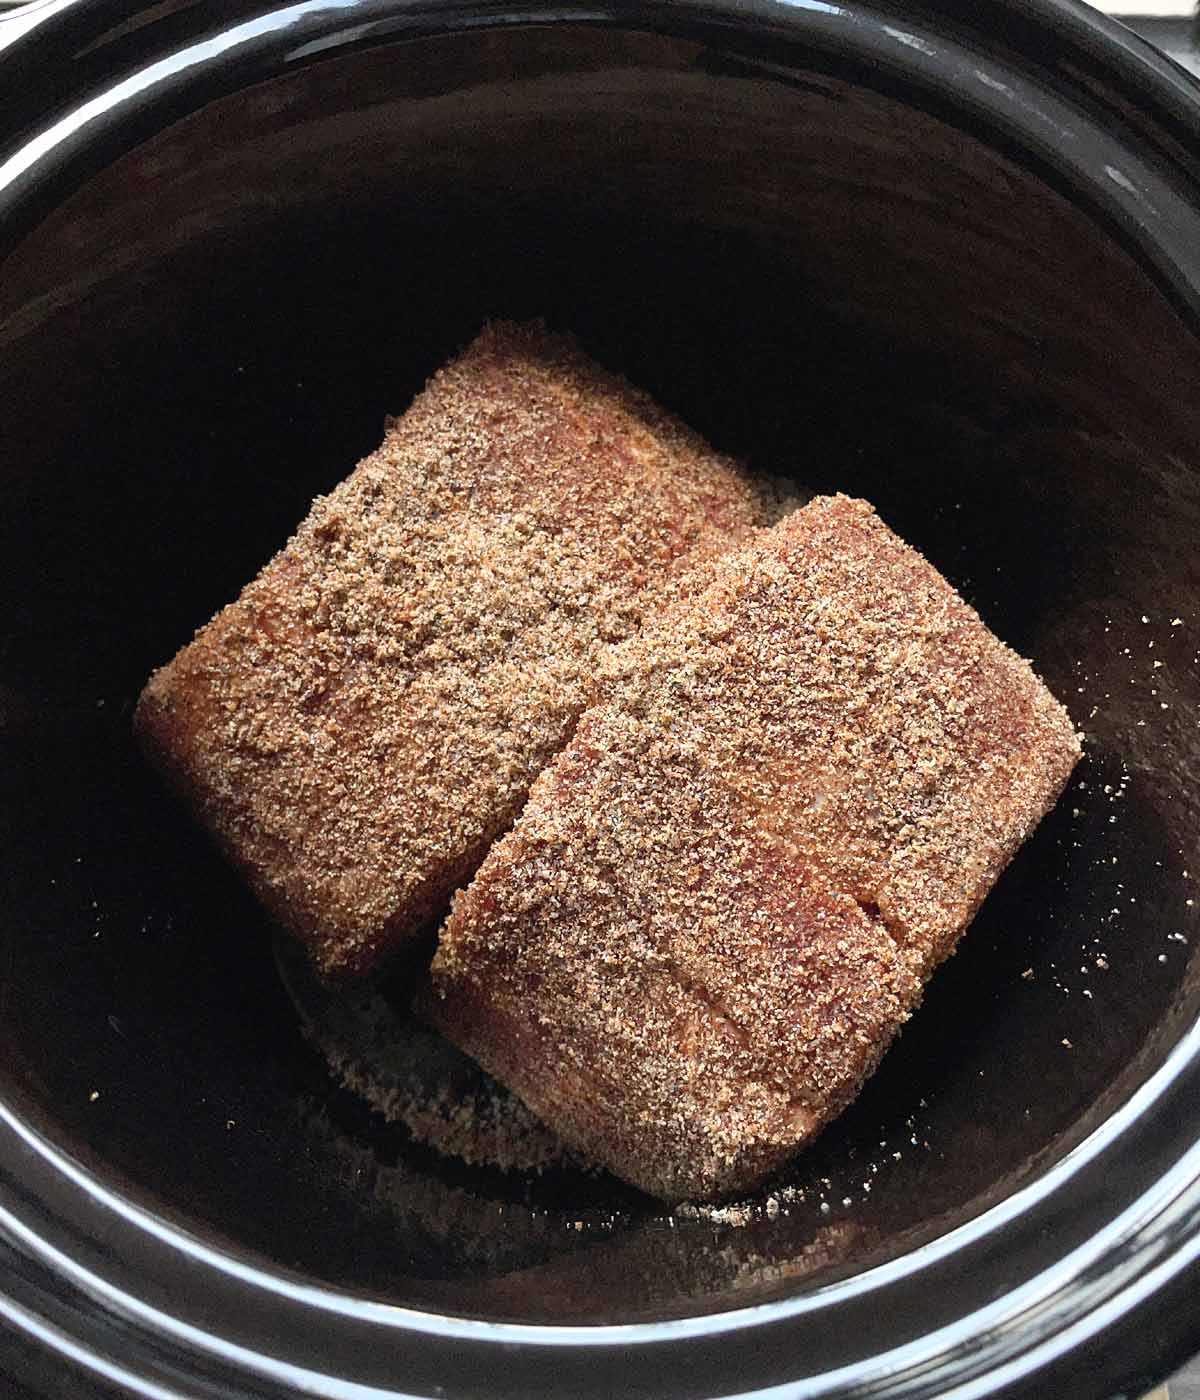 Two uncooked chunks of pork coated in dry seasonings in black pot.